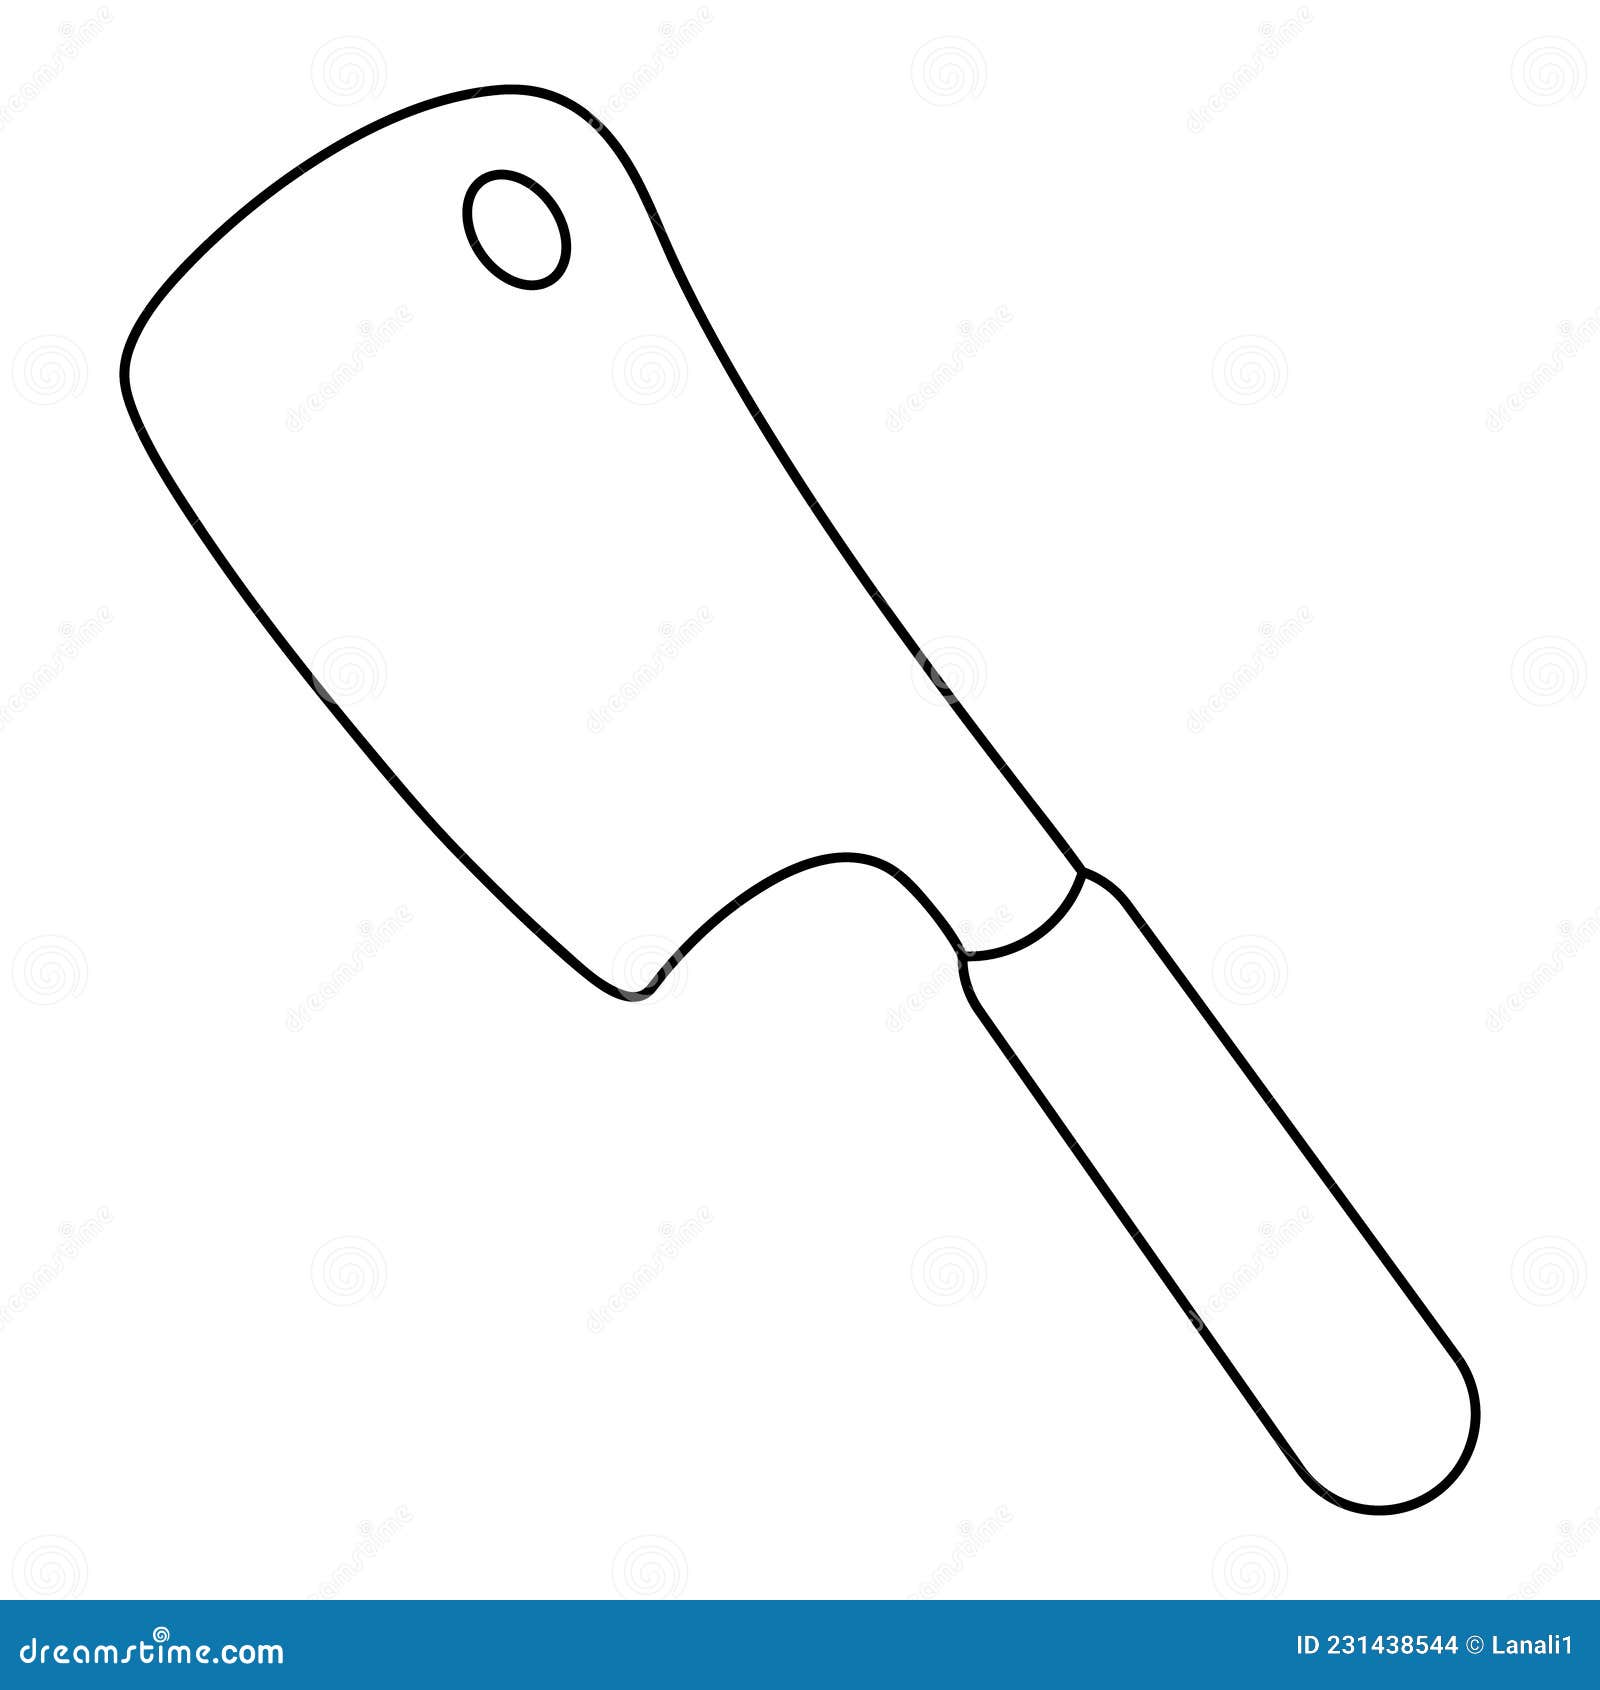 Hatchet. Sketch. Barbecue Meat and Fish Cutting Tool. Sharp Blade. Knife  Product. Vector Illustration. Coloring Stock Vector - Illustration of  cutlery, element: 231438544